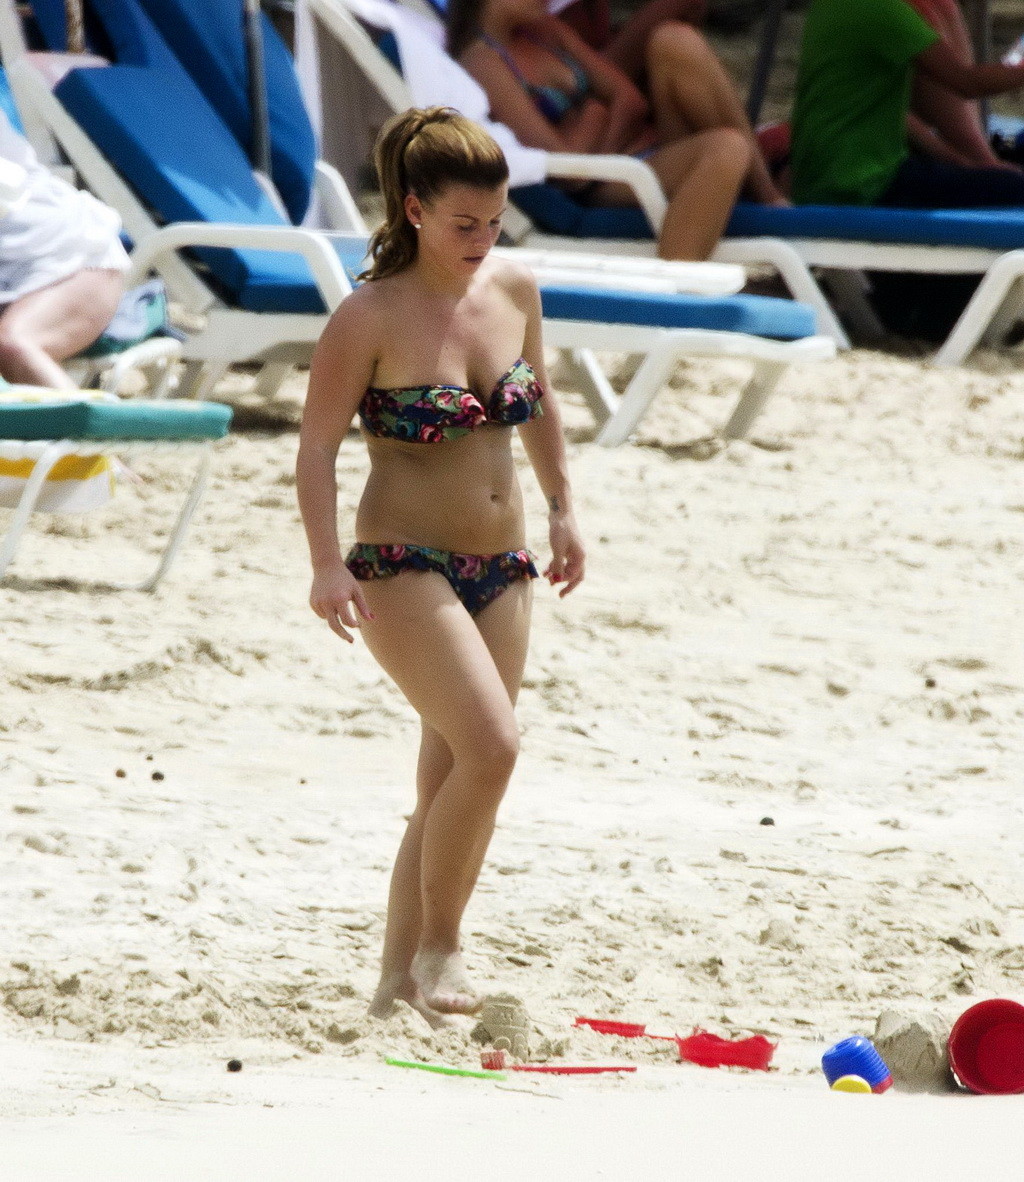 Coleen Rooney showing off her plump bikini body on a beach in Barbados #75216063